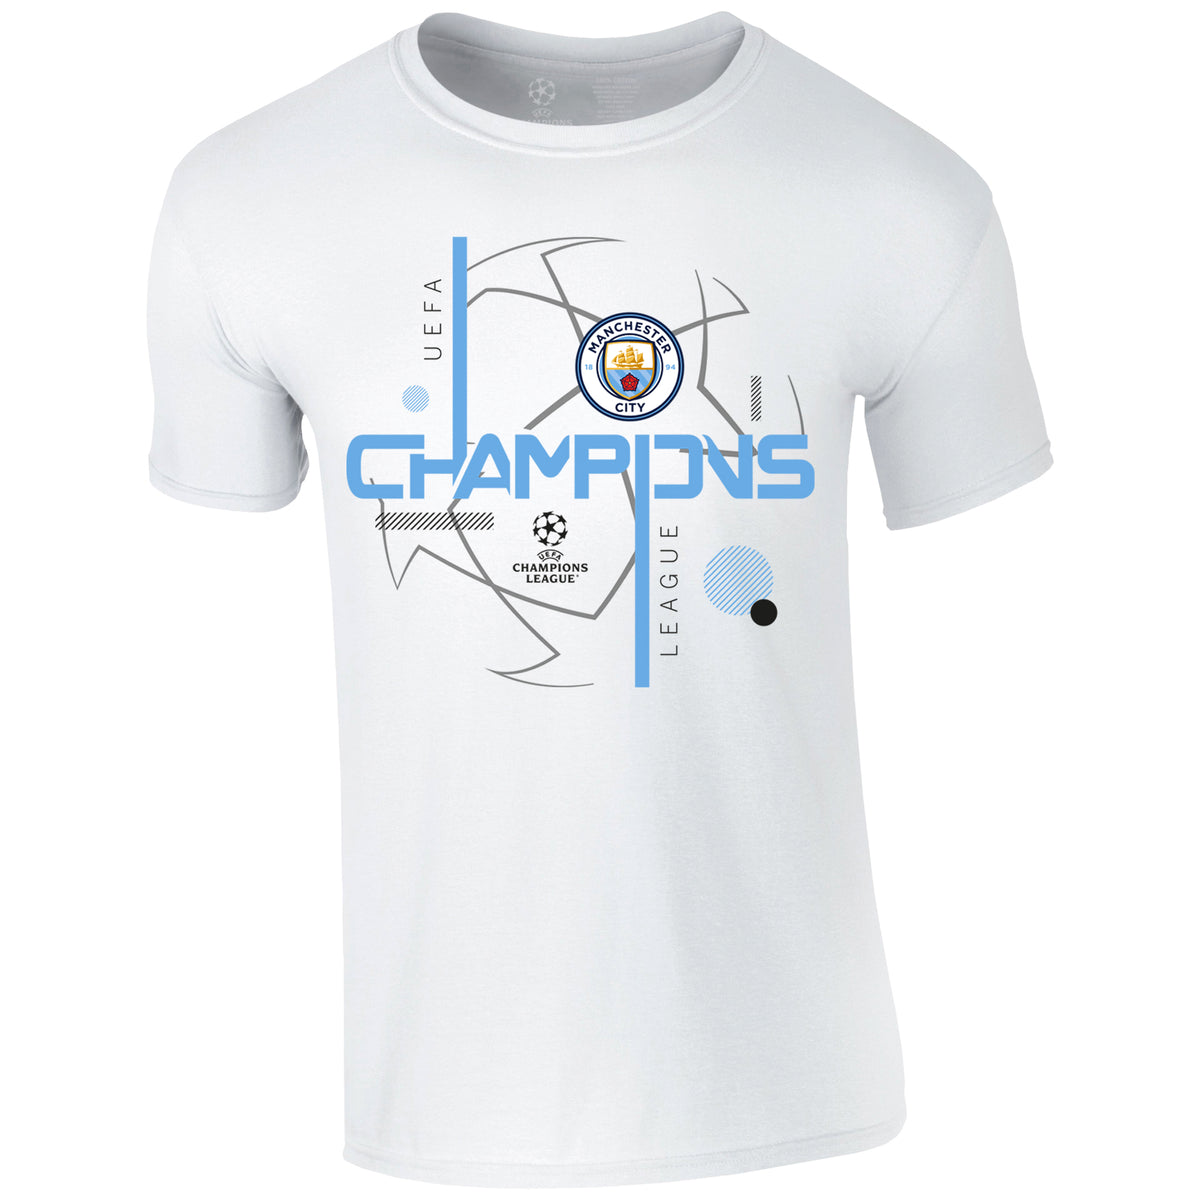 Champions League Manchester City Starball T-Shirt White